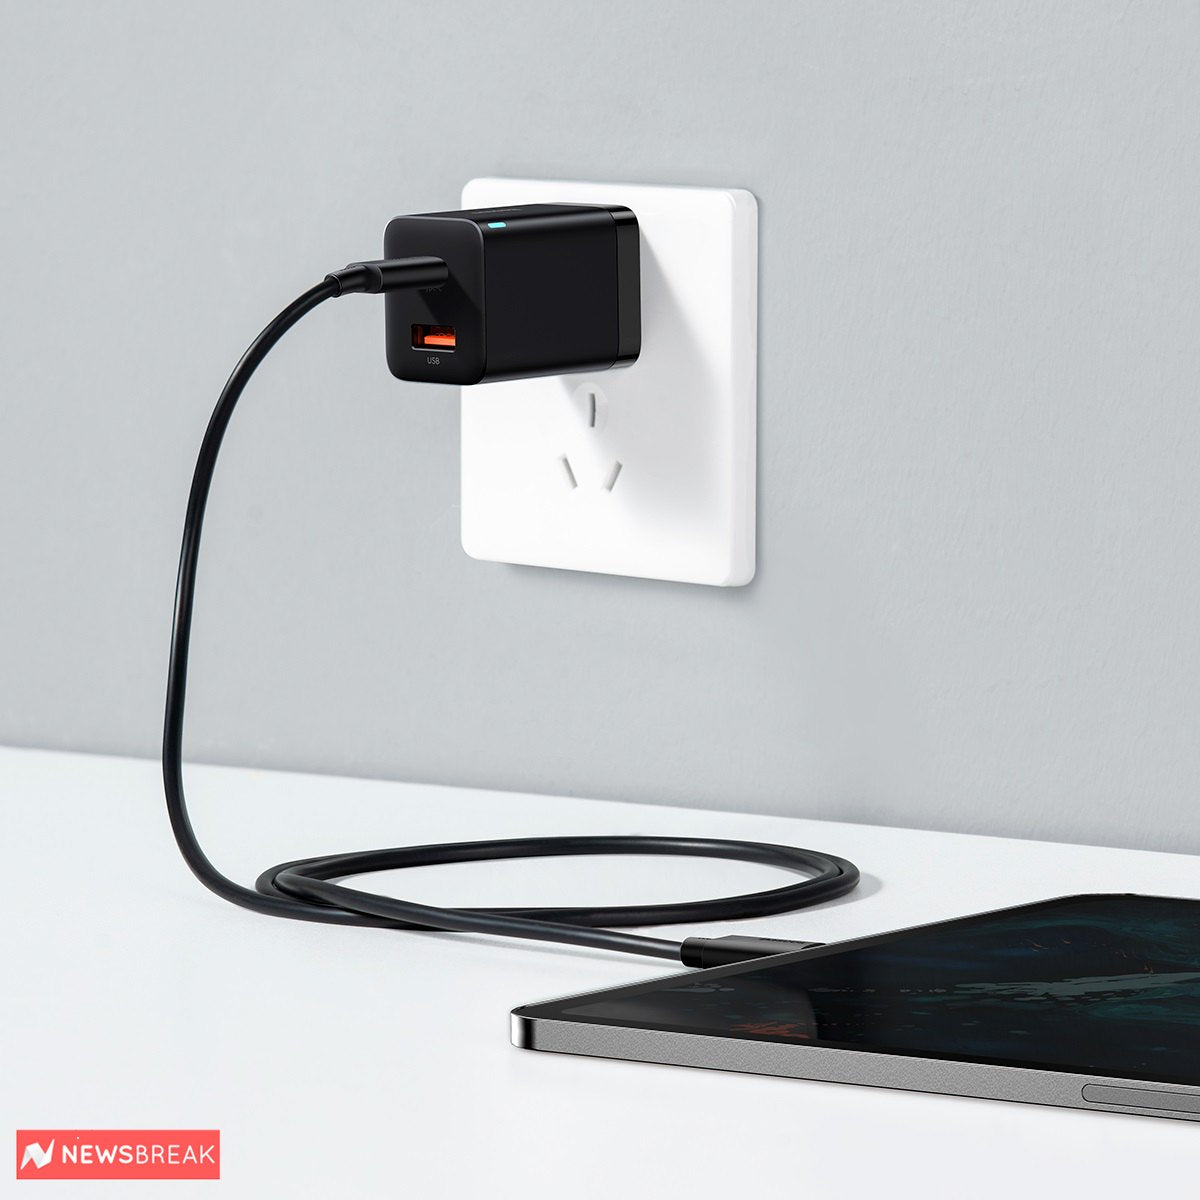 Baseus’ 65W PowerCombo GaN charger is finally the all-in-one charging solution you’ve been looking for